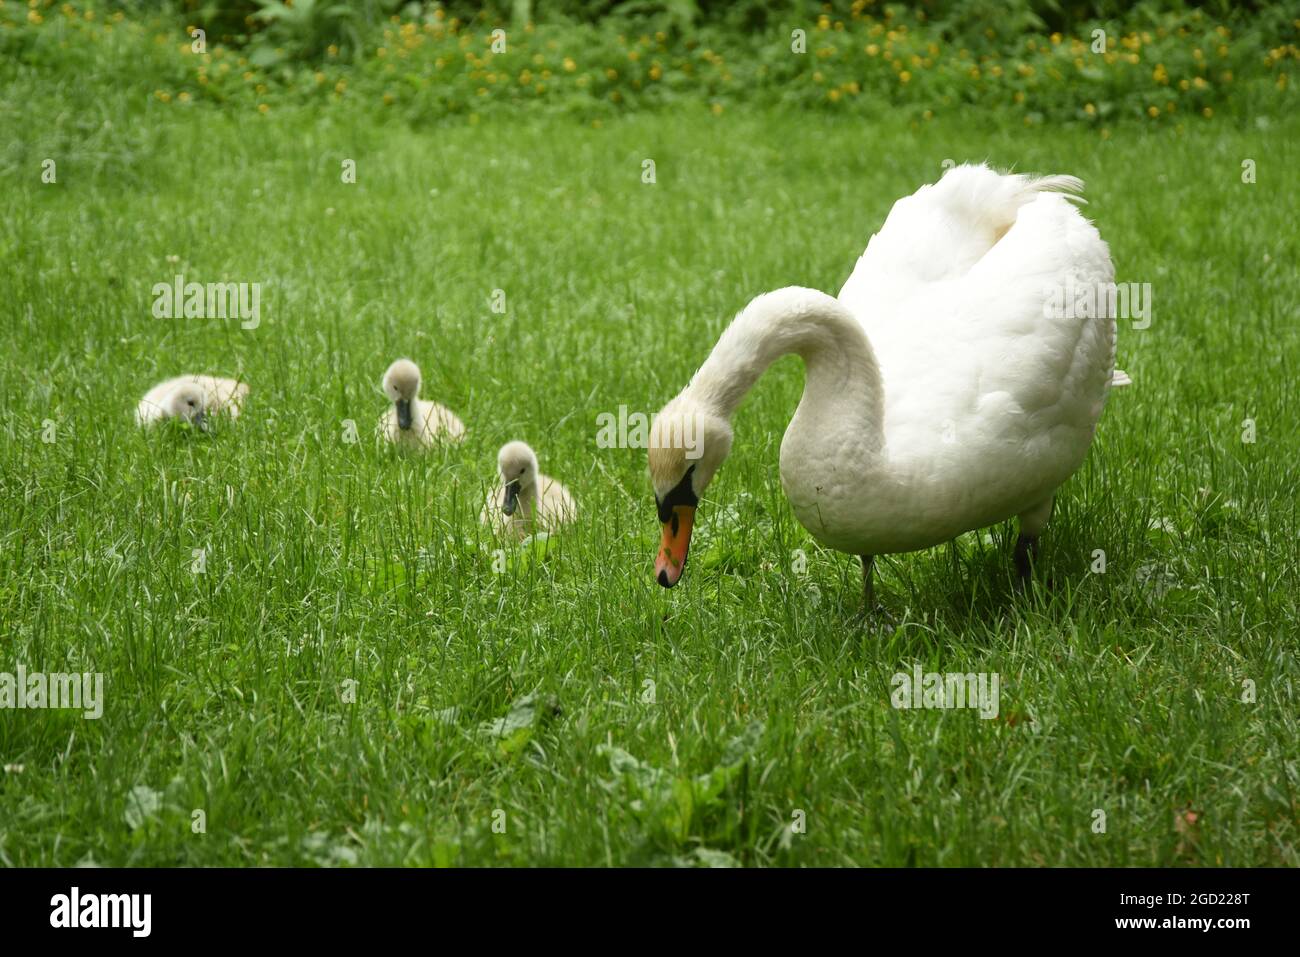 Parent Swan and cygnets on the grass eating Stock Photo